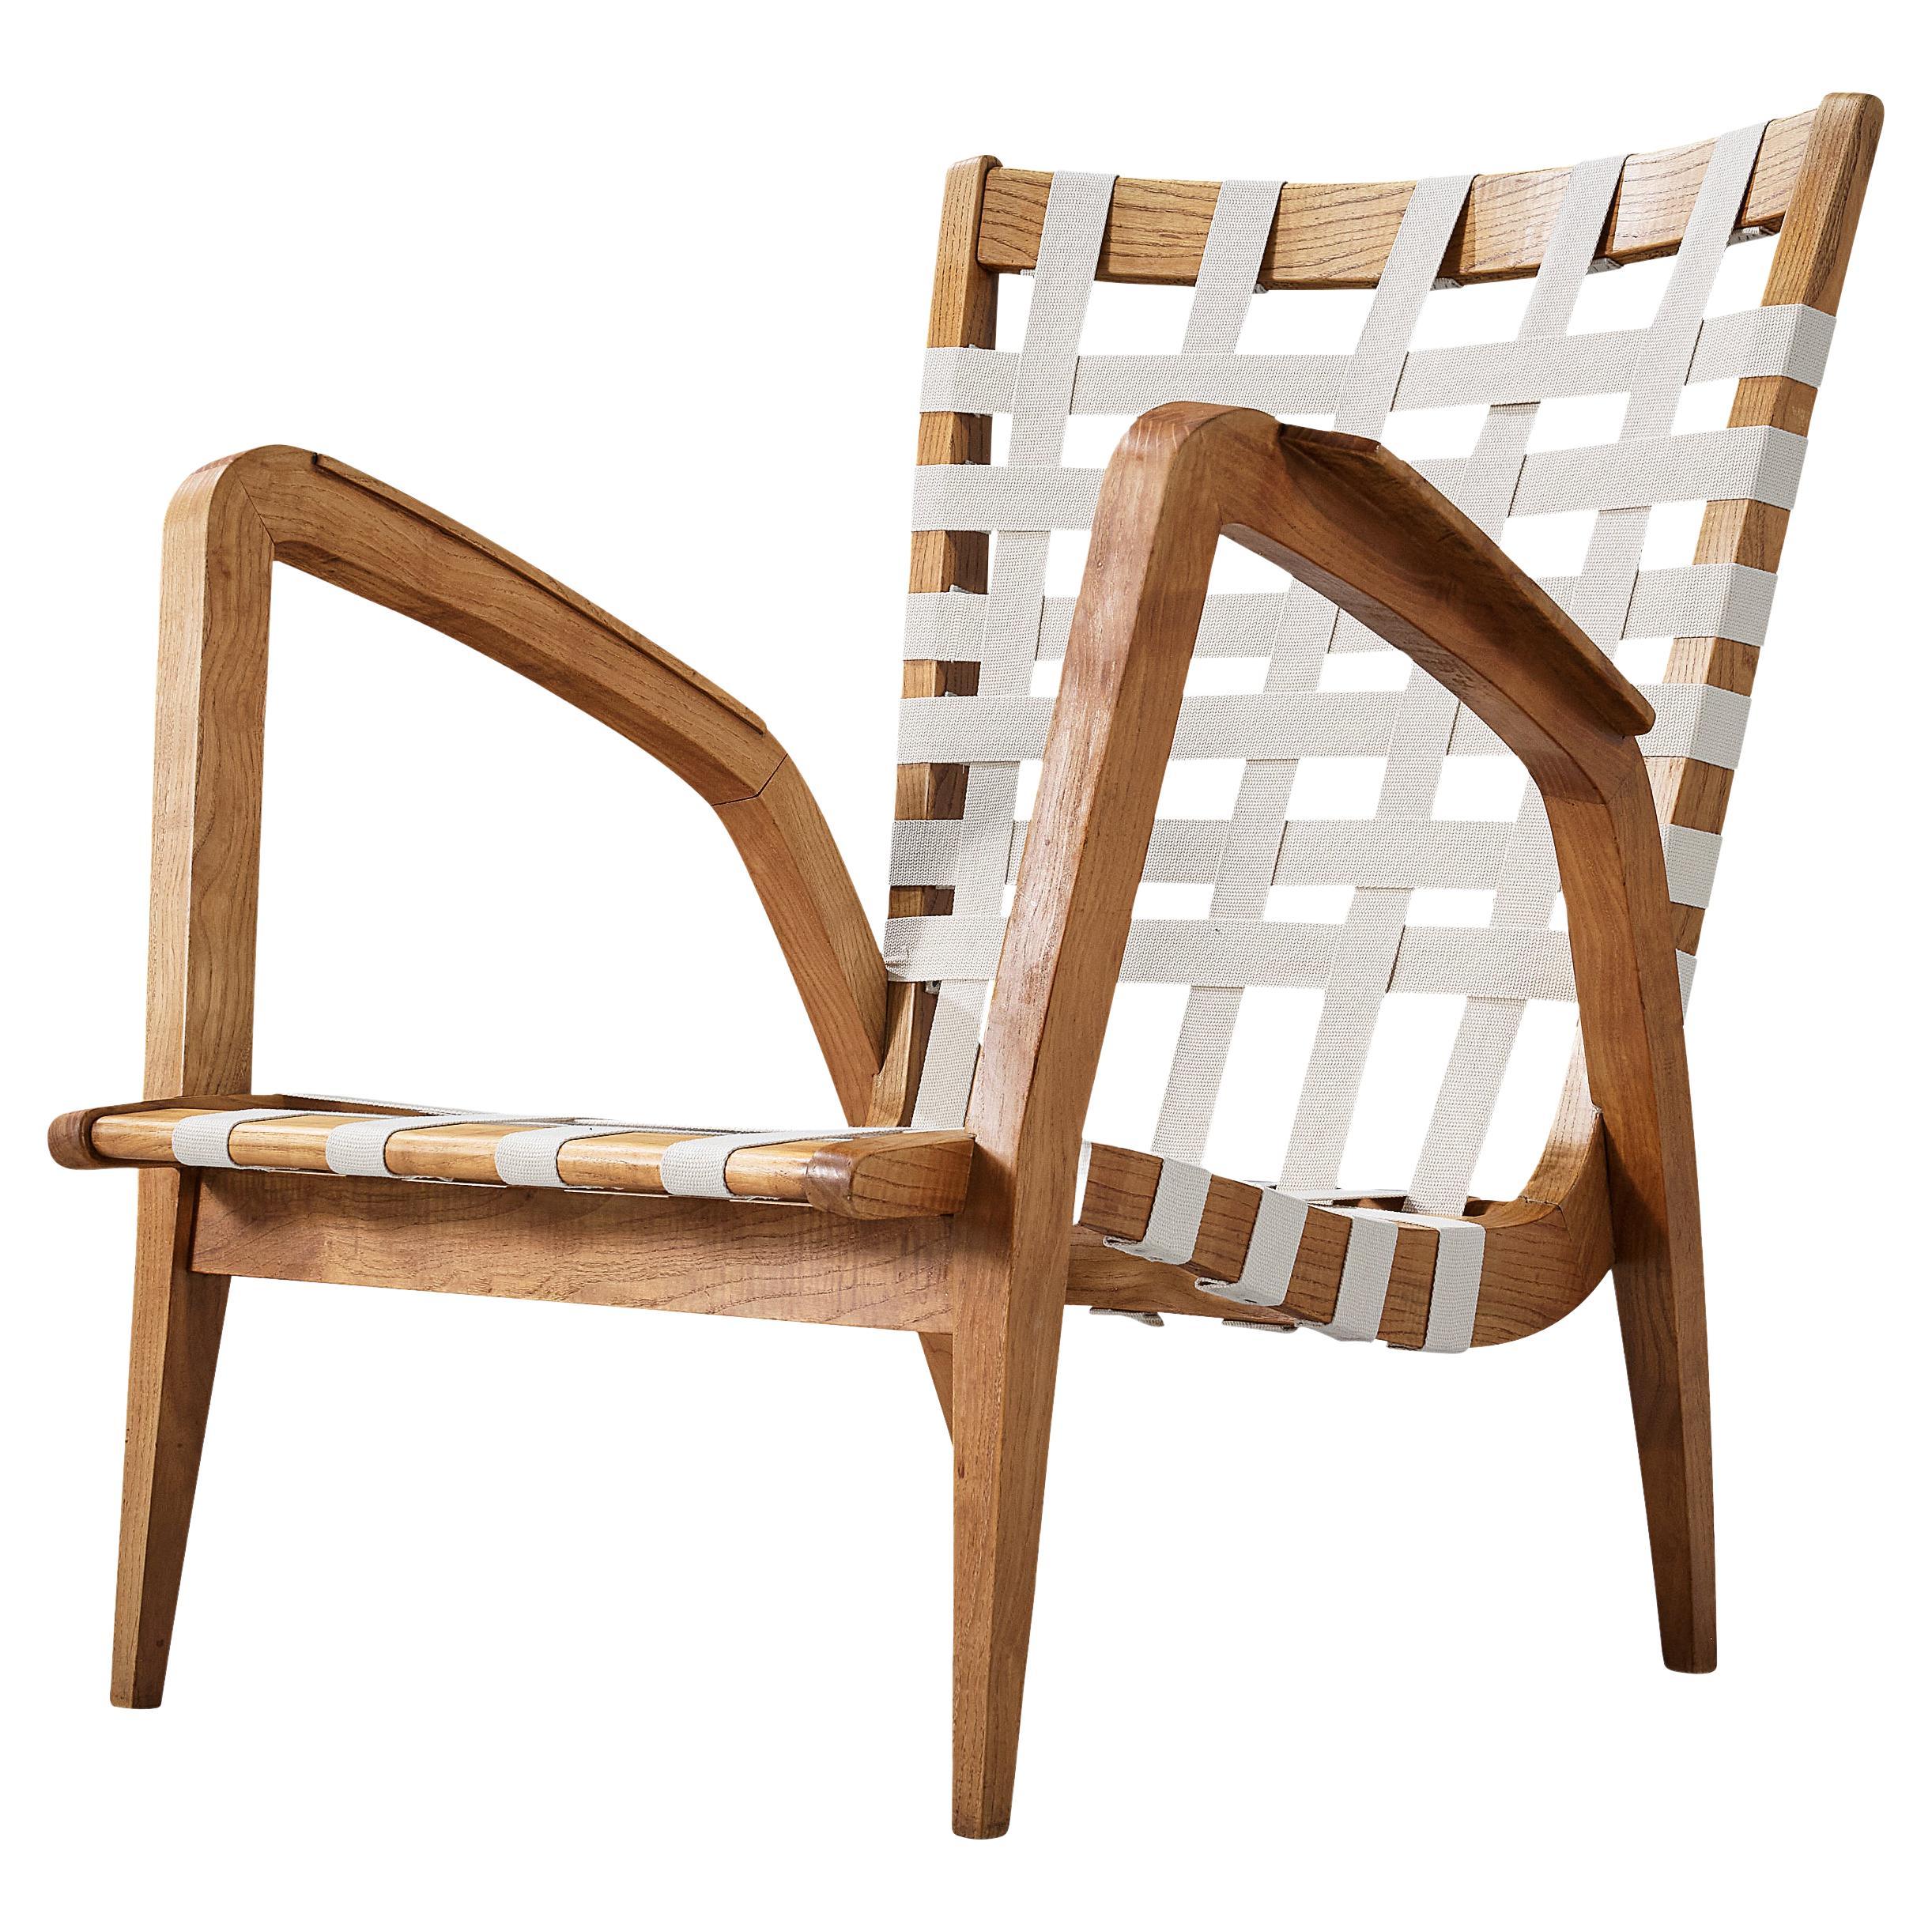 Webbing Chairs - 30 For Sale on 1stDibs | furniture webbing 